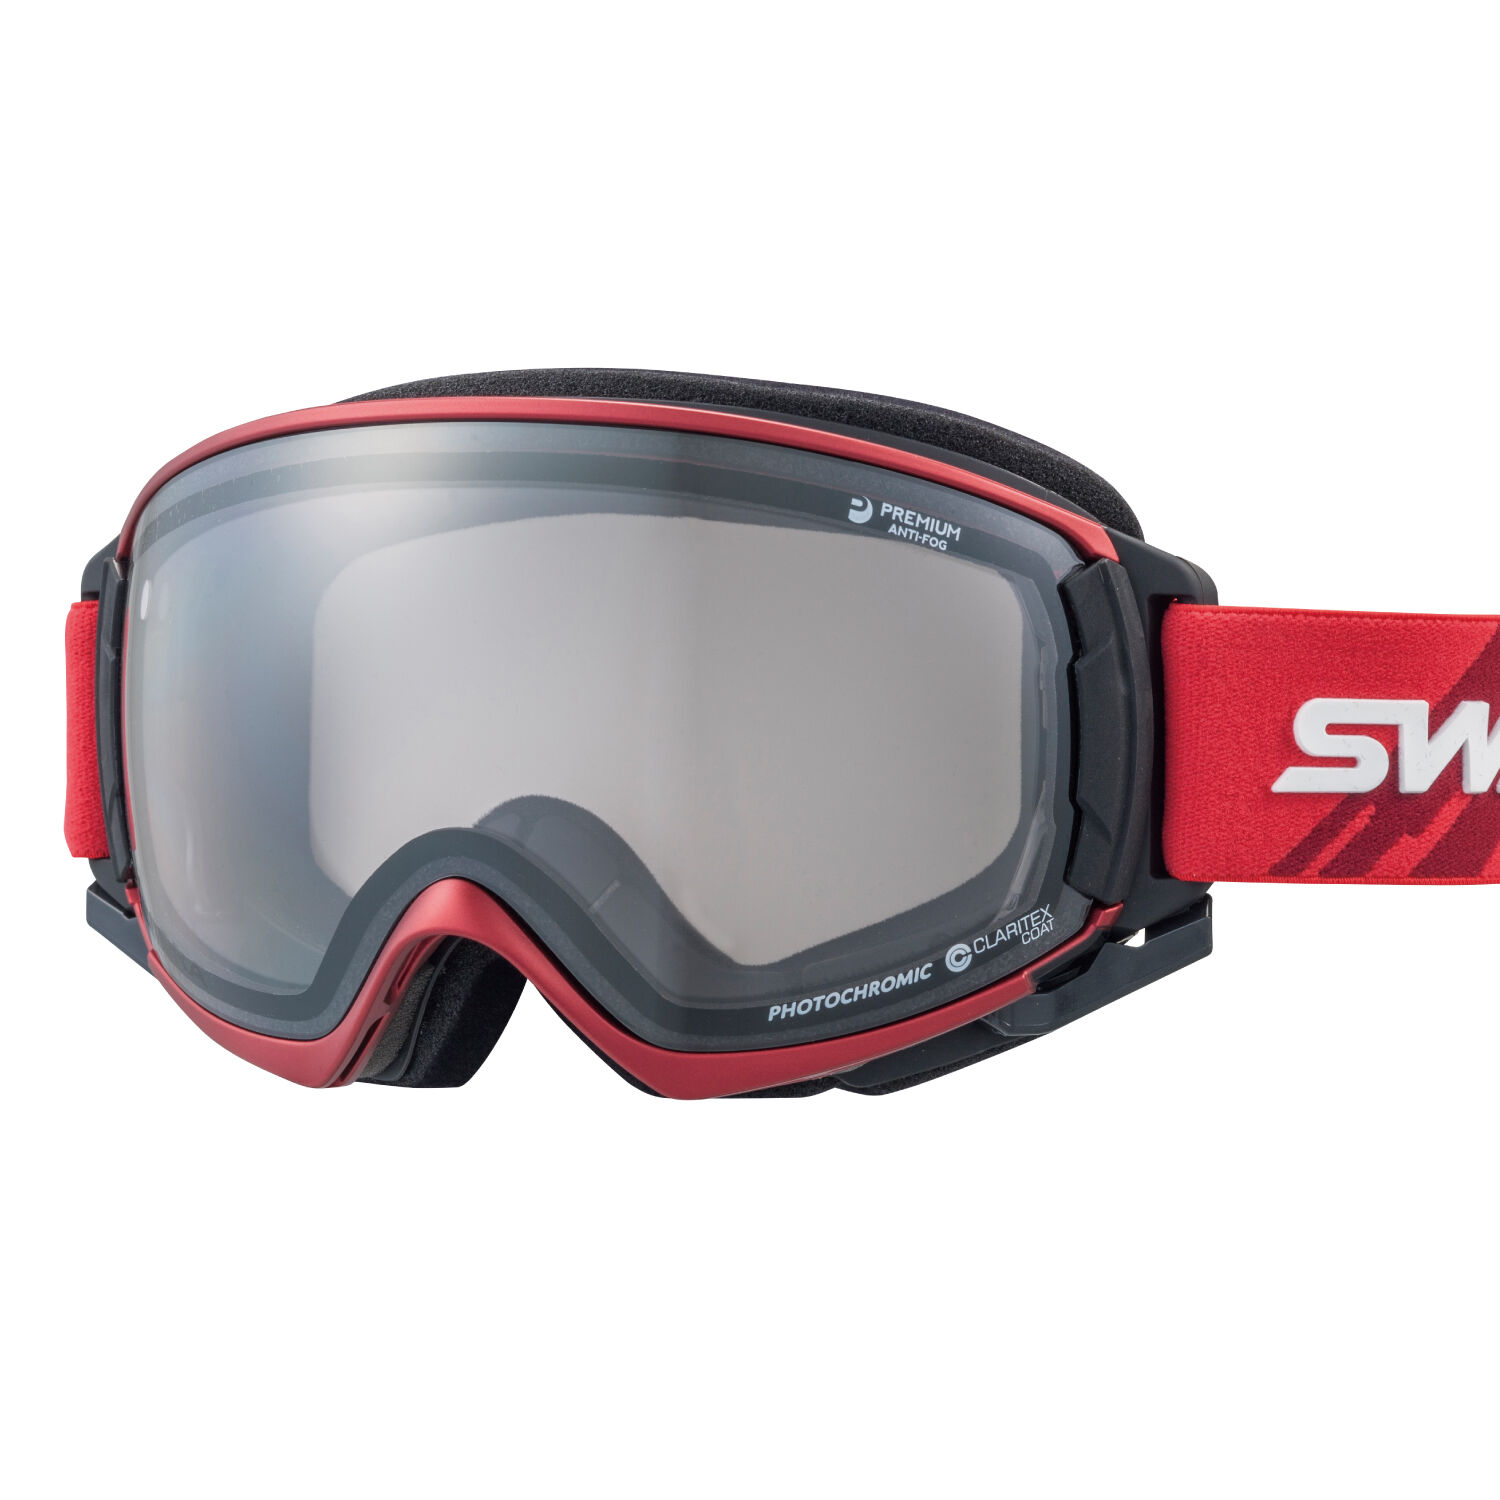 Snow Goggles | SWANS Official Online Shop